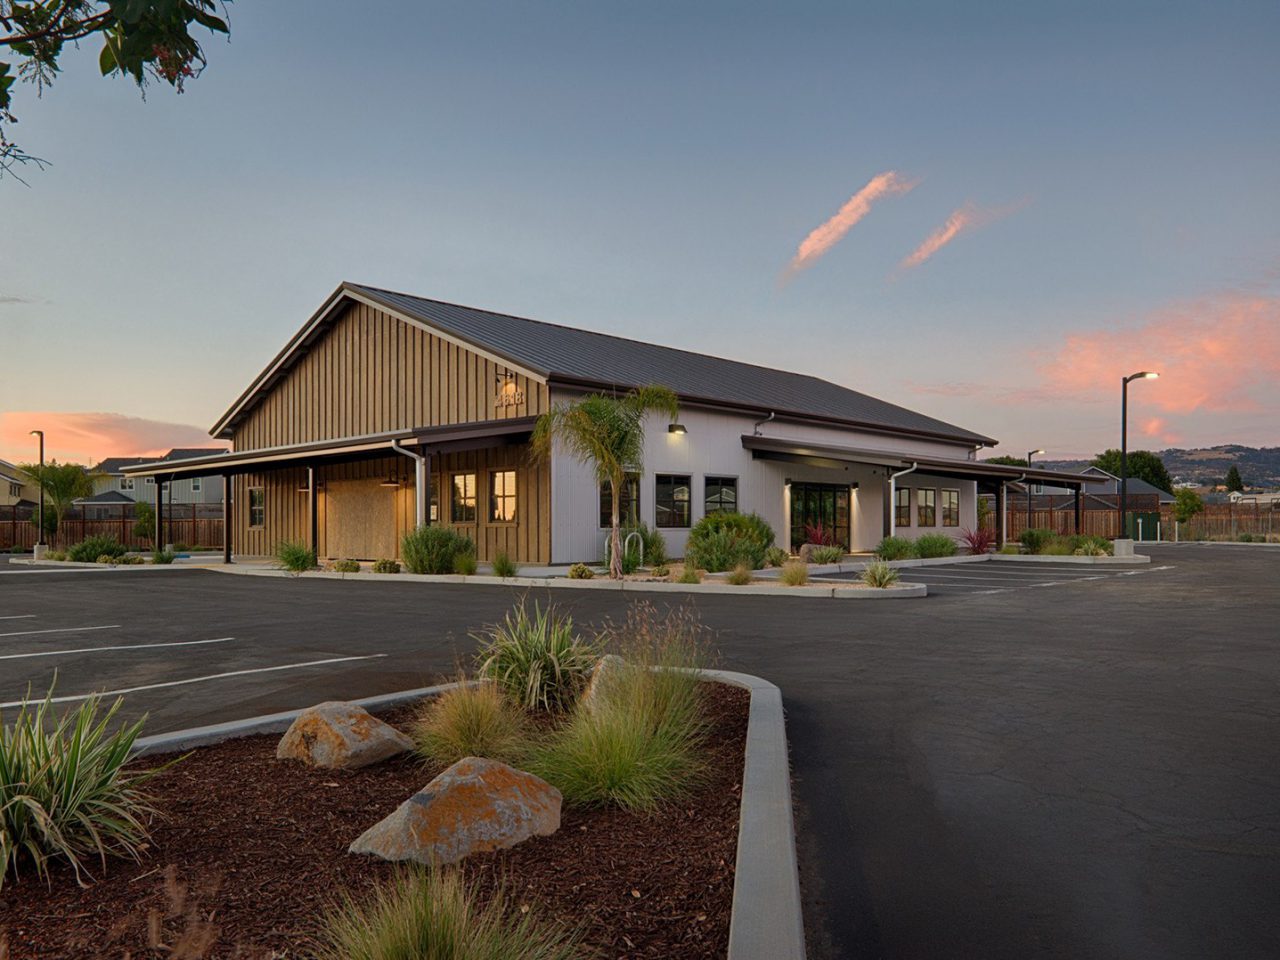 Venturi Building renovation and remodel completed by FDC in Sonoma County